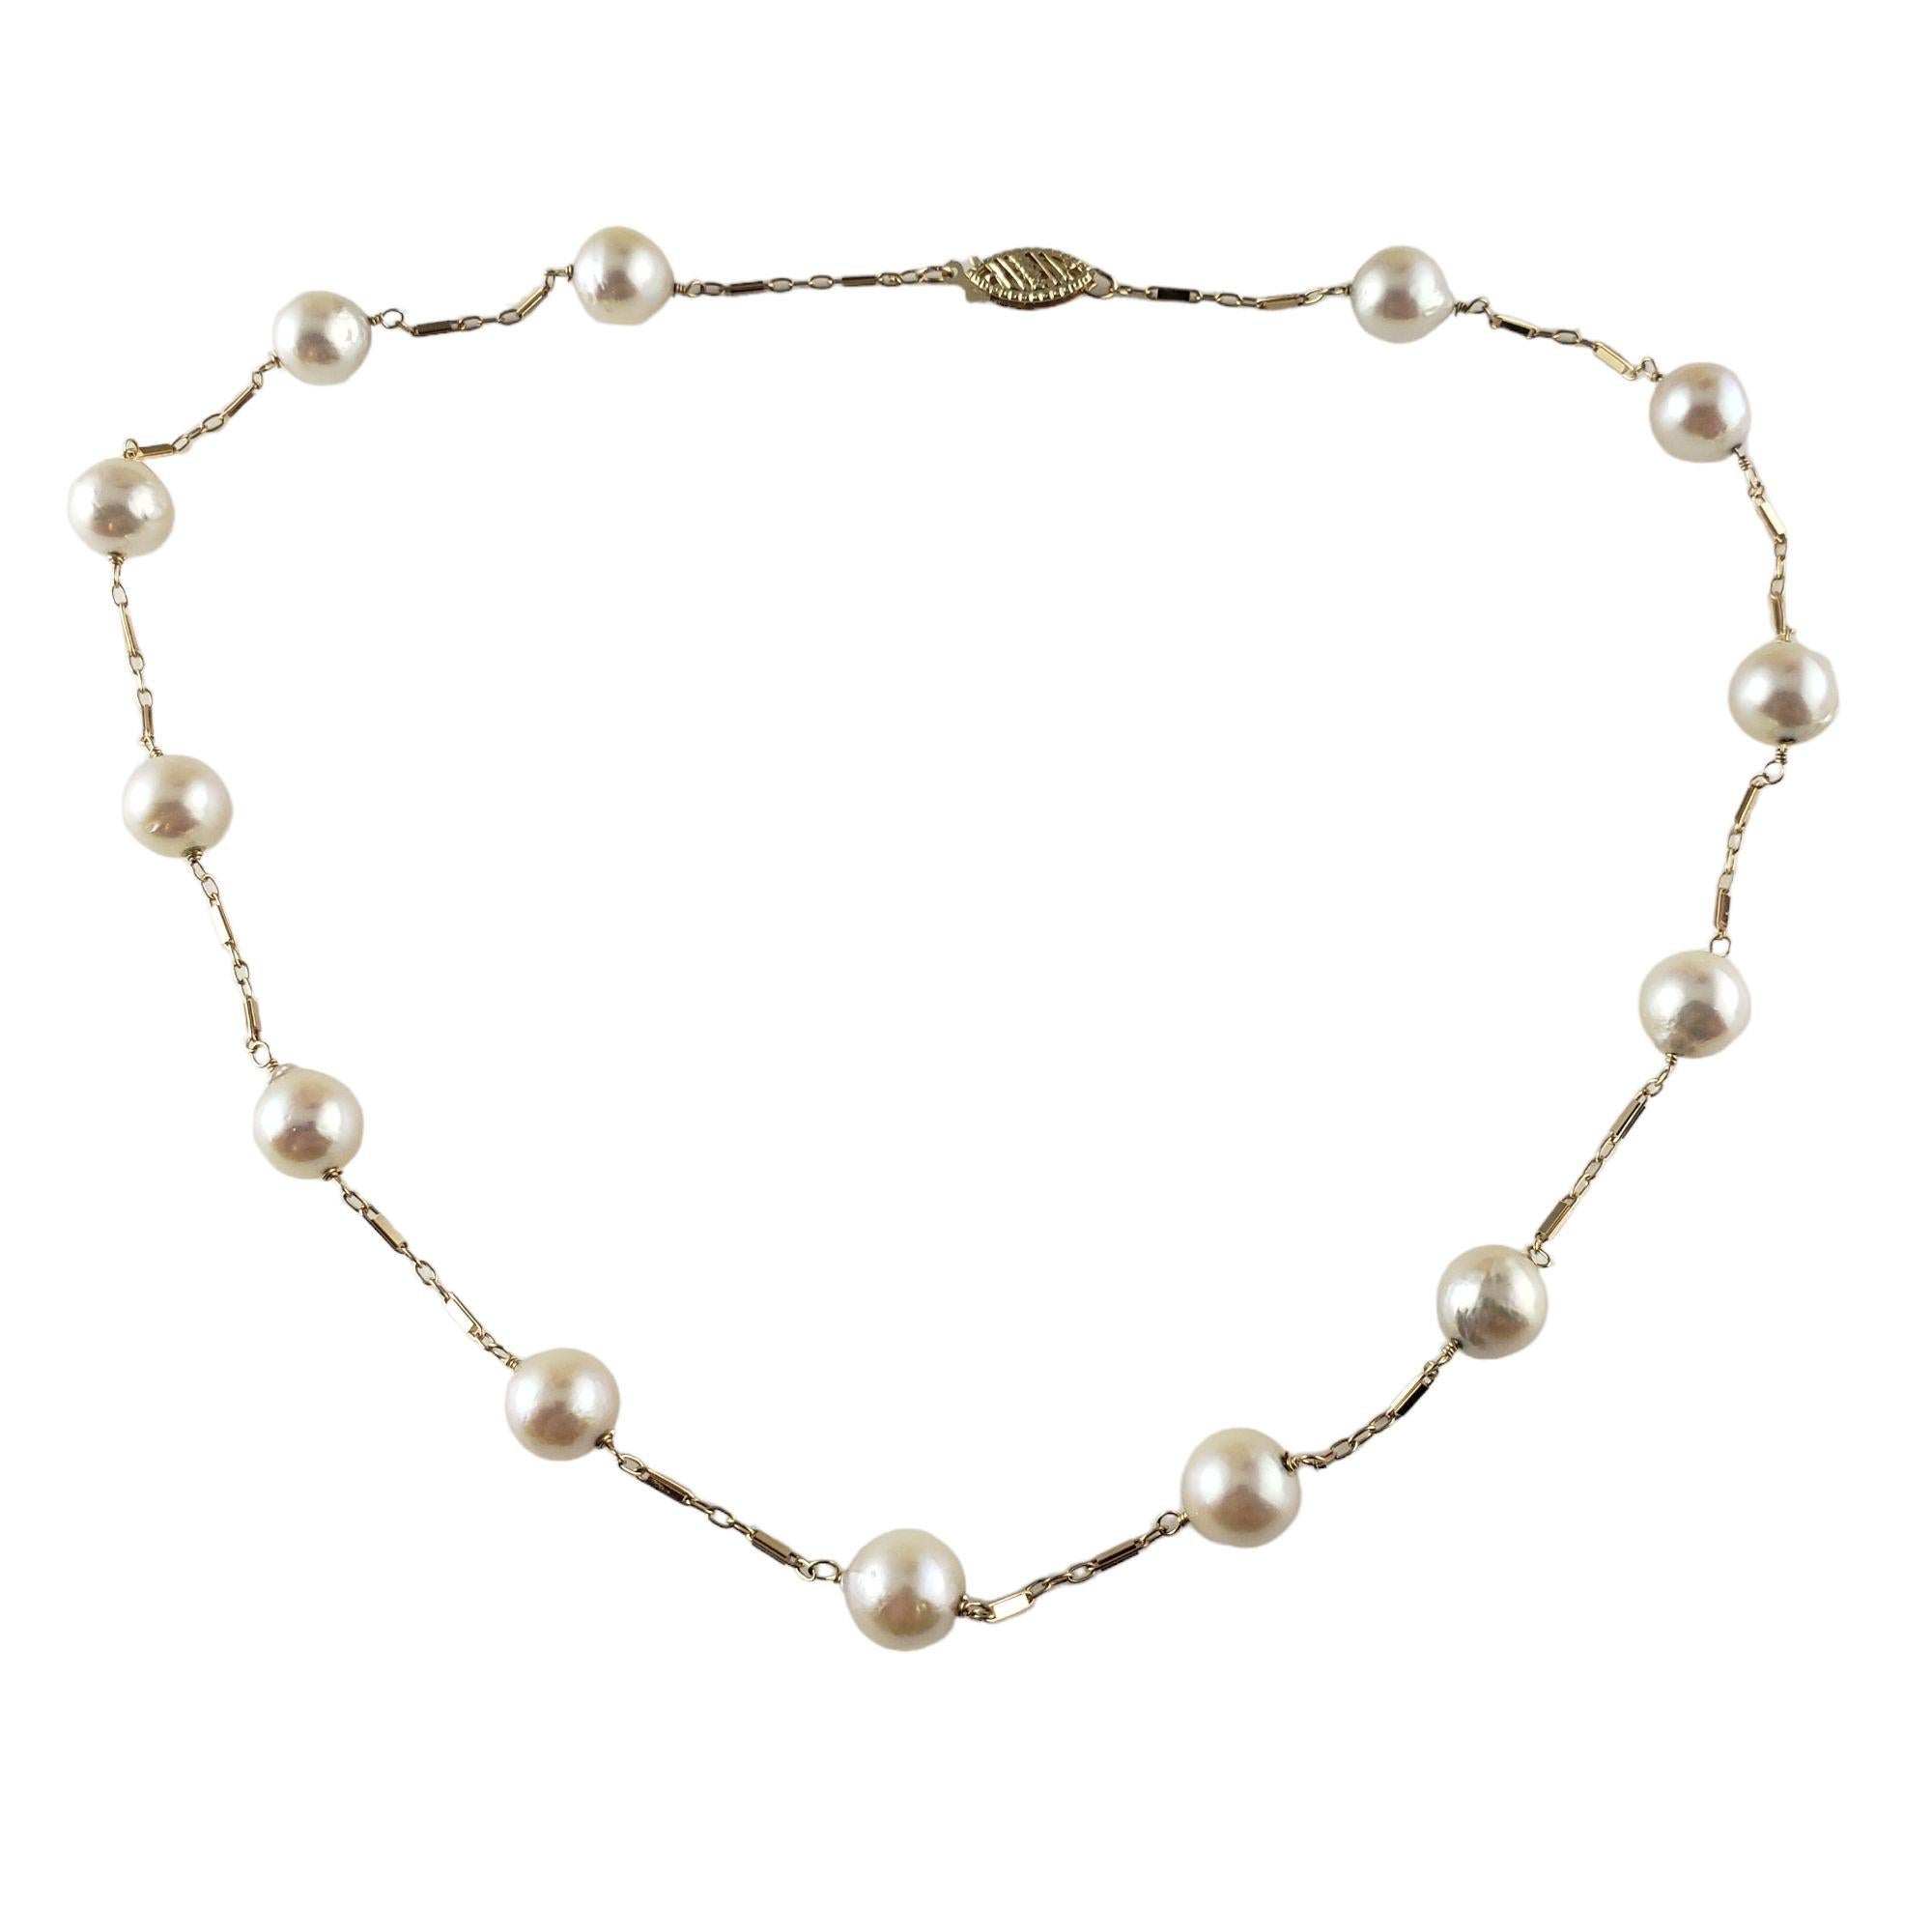 Vintage 14 Karat Yellow Gold and Freshwater Pearl Station Necklace #14707 In Good Condition For Sale In Washington Depot, CT